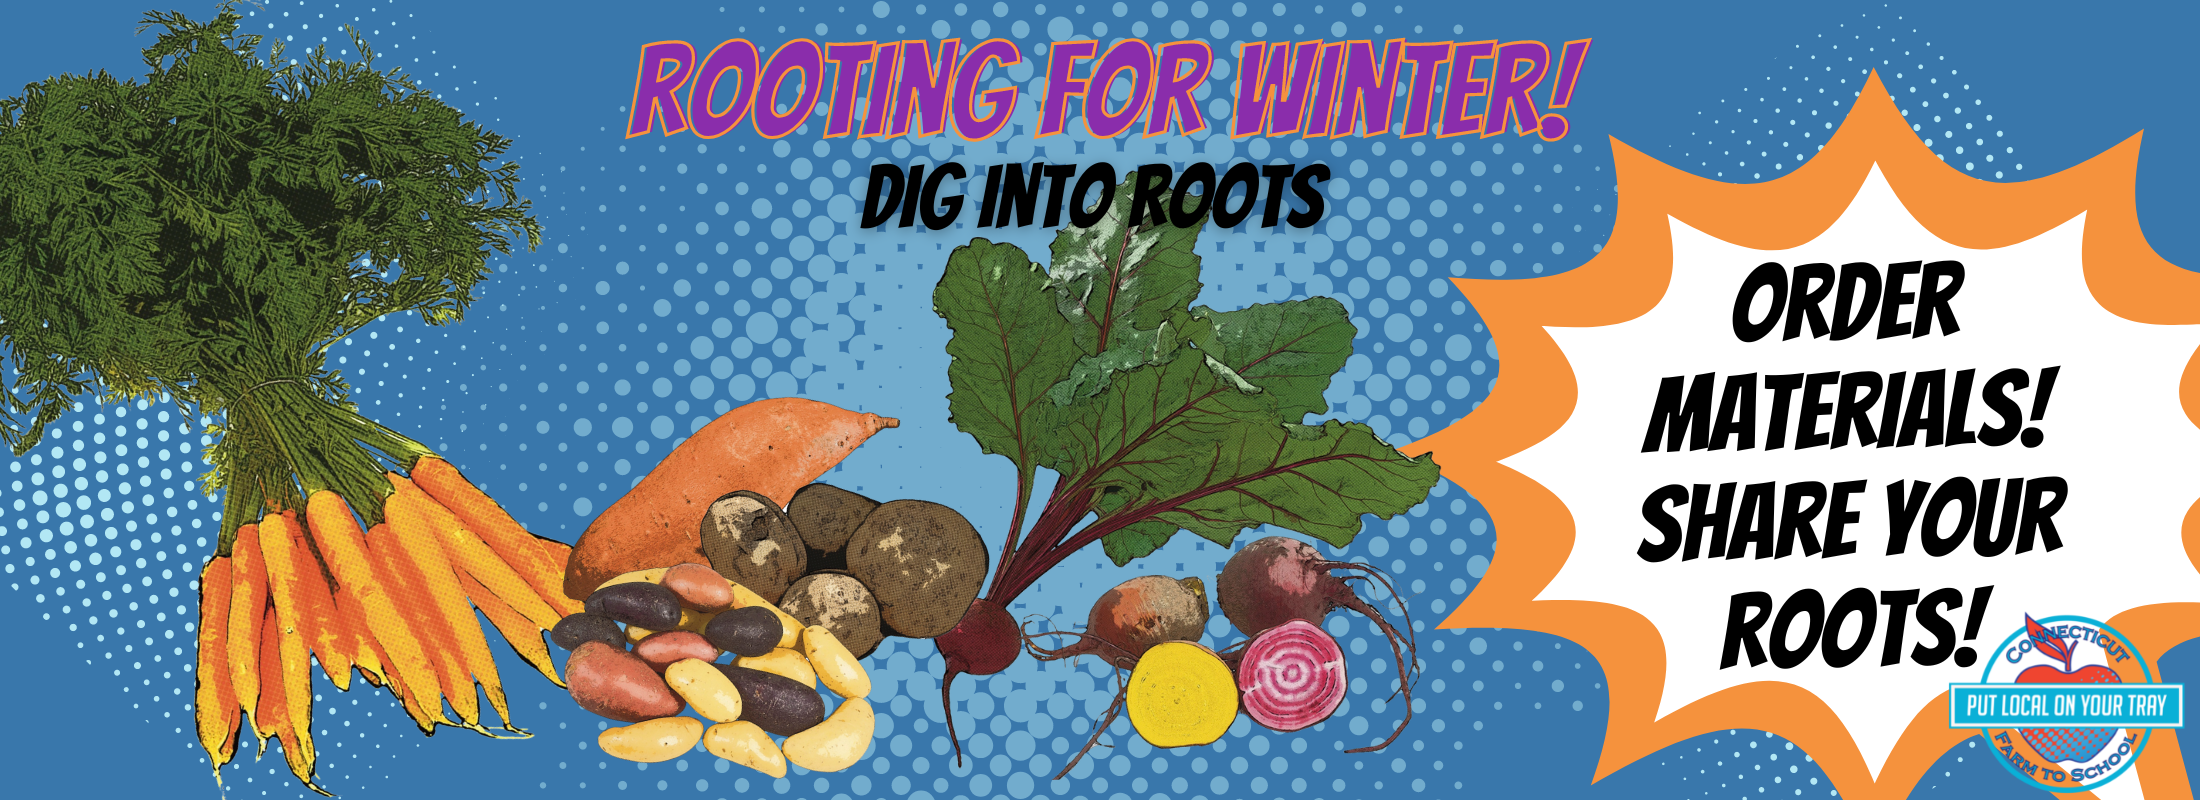 Rooting for winter campaign with pictures of carrot, beets, and potatoes